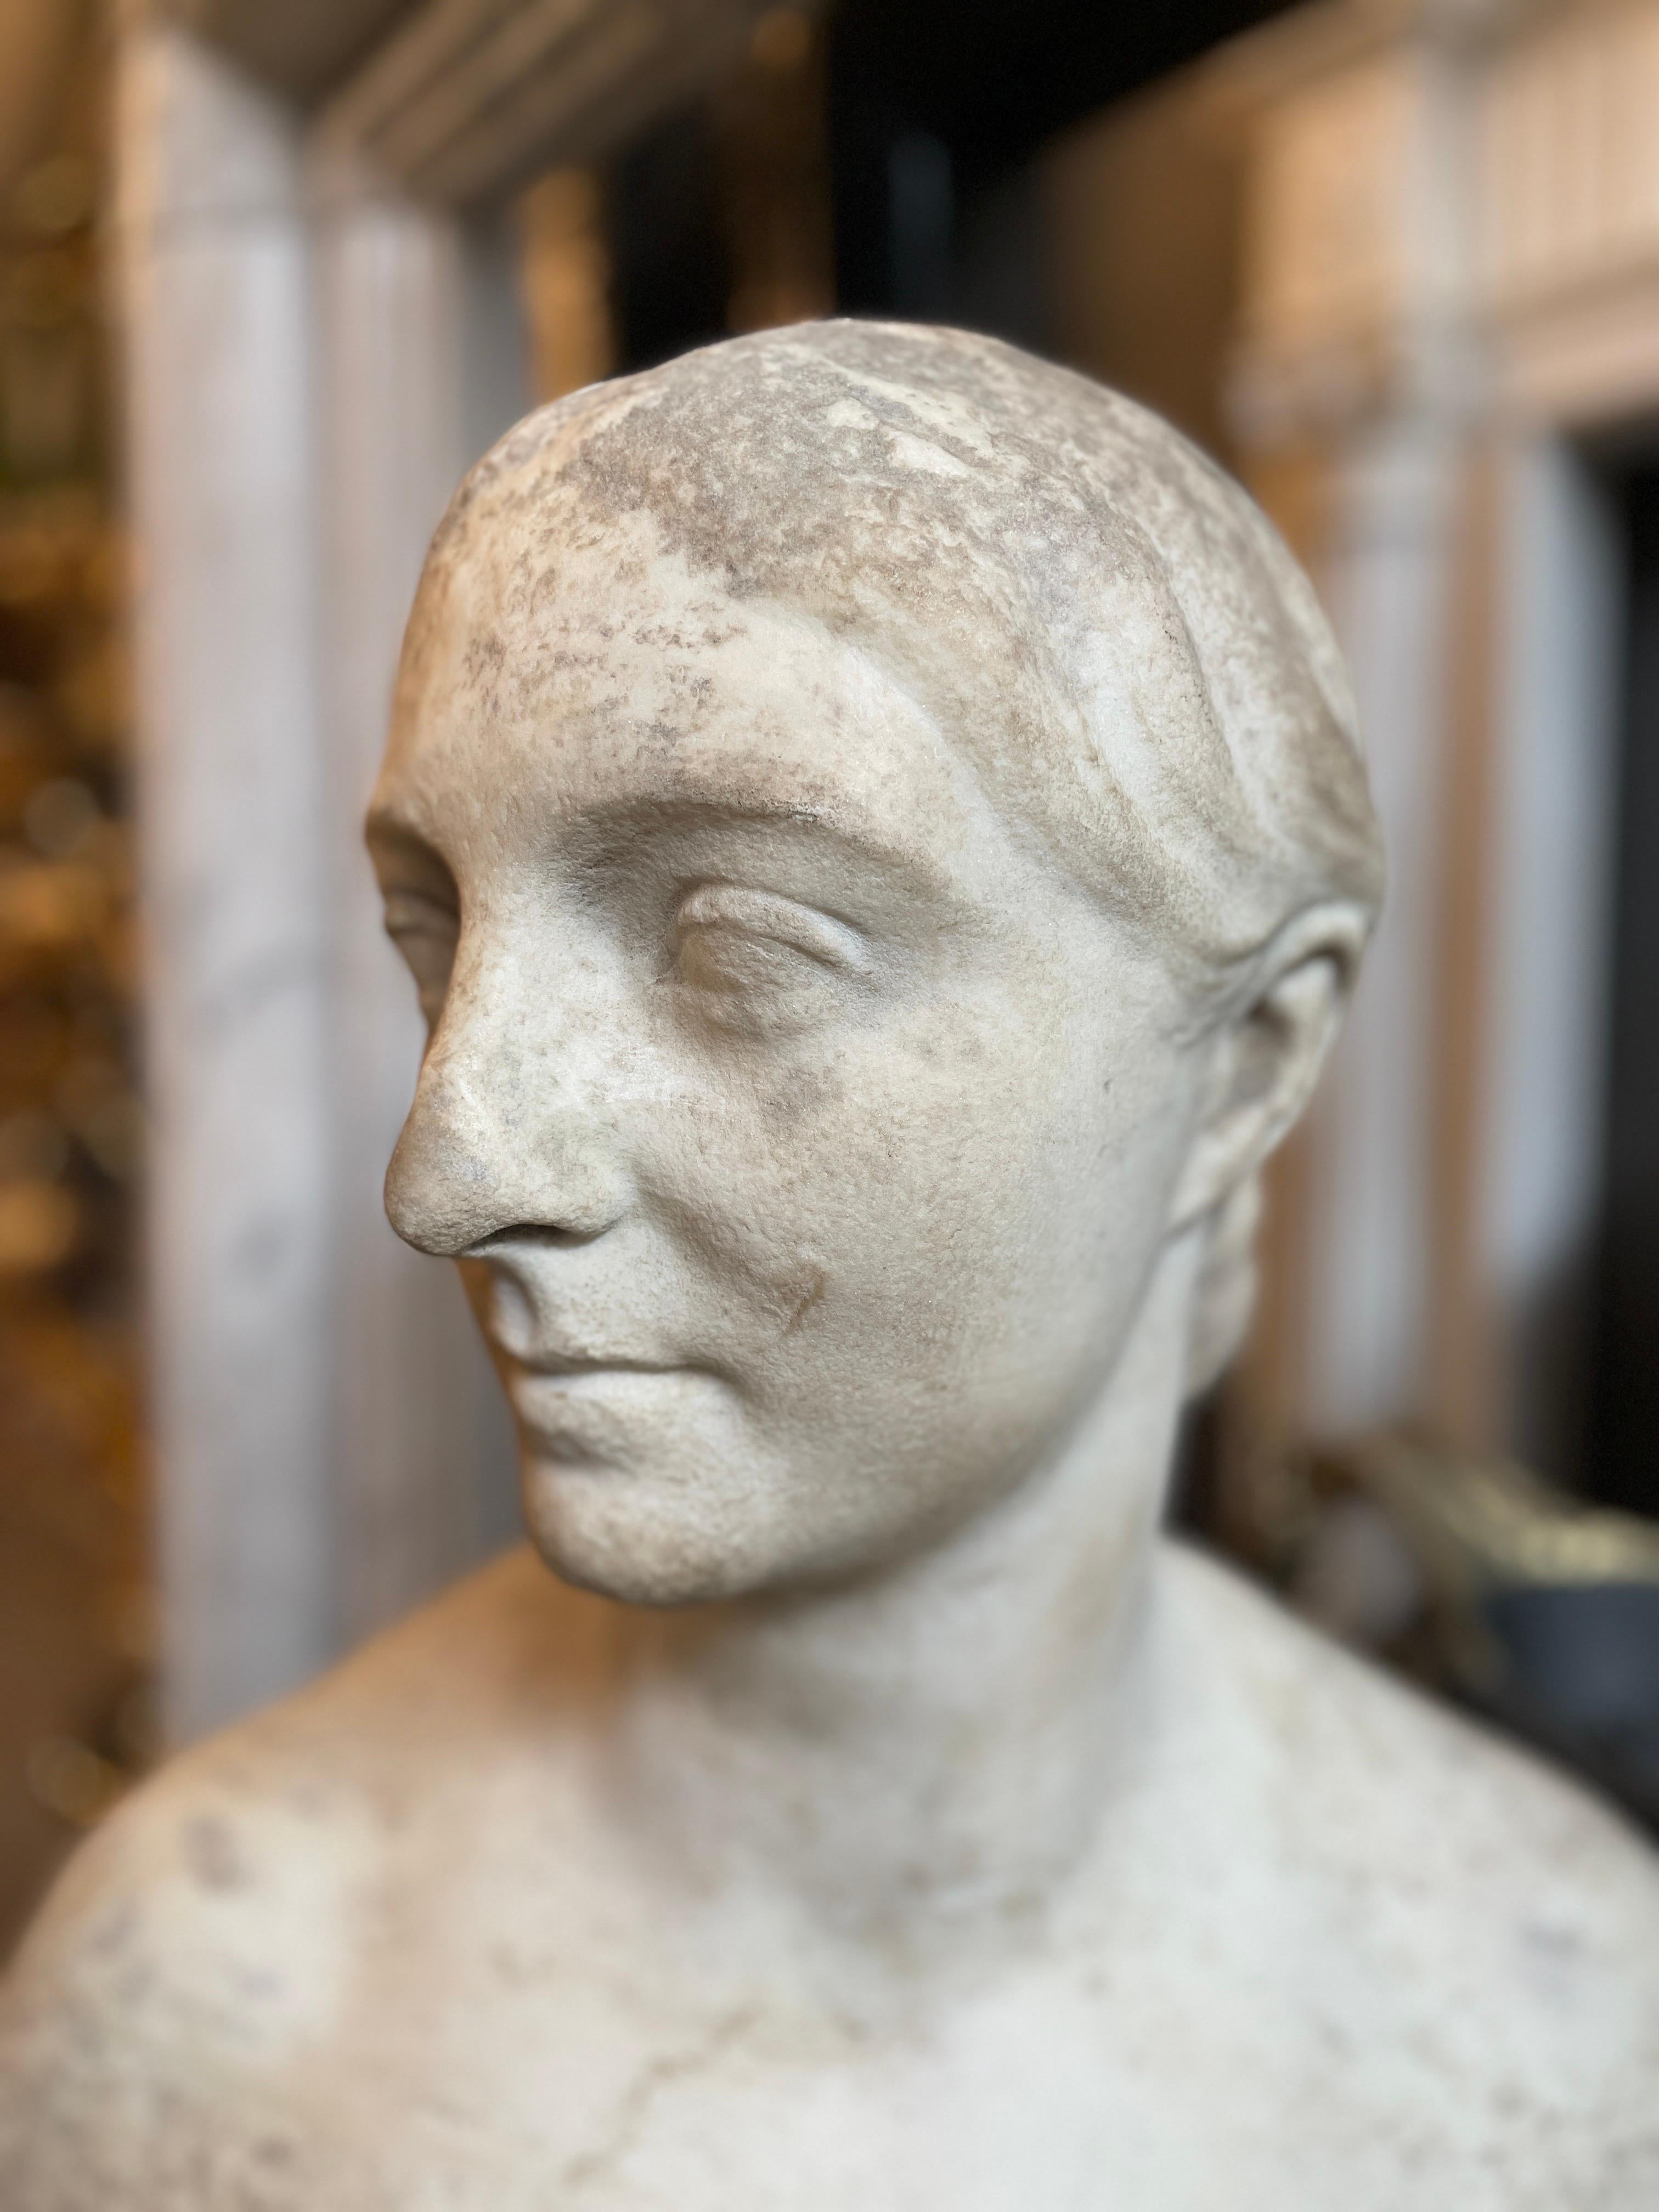 A Classical bust of female form with naked shoulders, draped robe exposing one breast, her hair tied back. Mounted on Socle pedestal 

By William Behnes circa 1840-50

Born in London, Behnes was the son of a Hanoverian piano-maker and his English